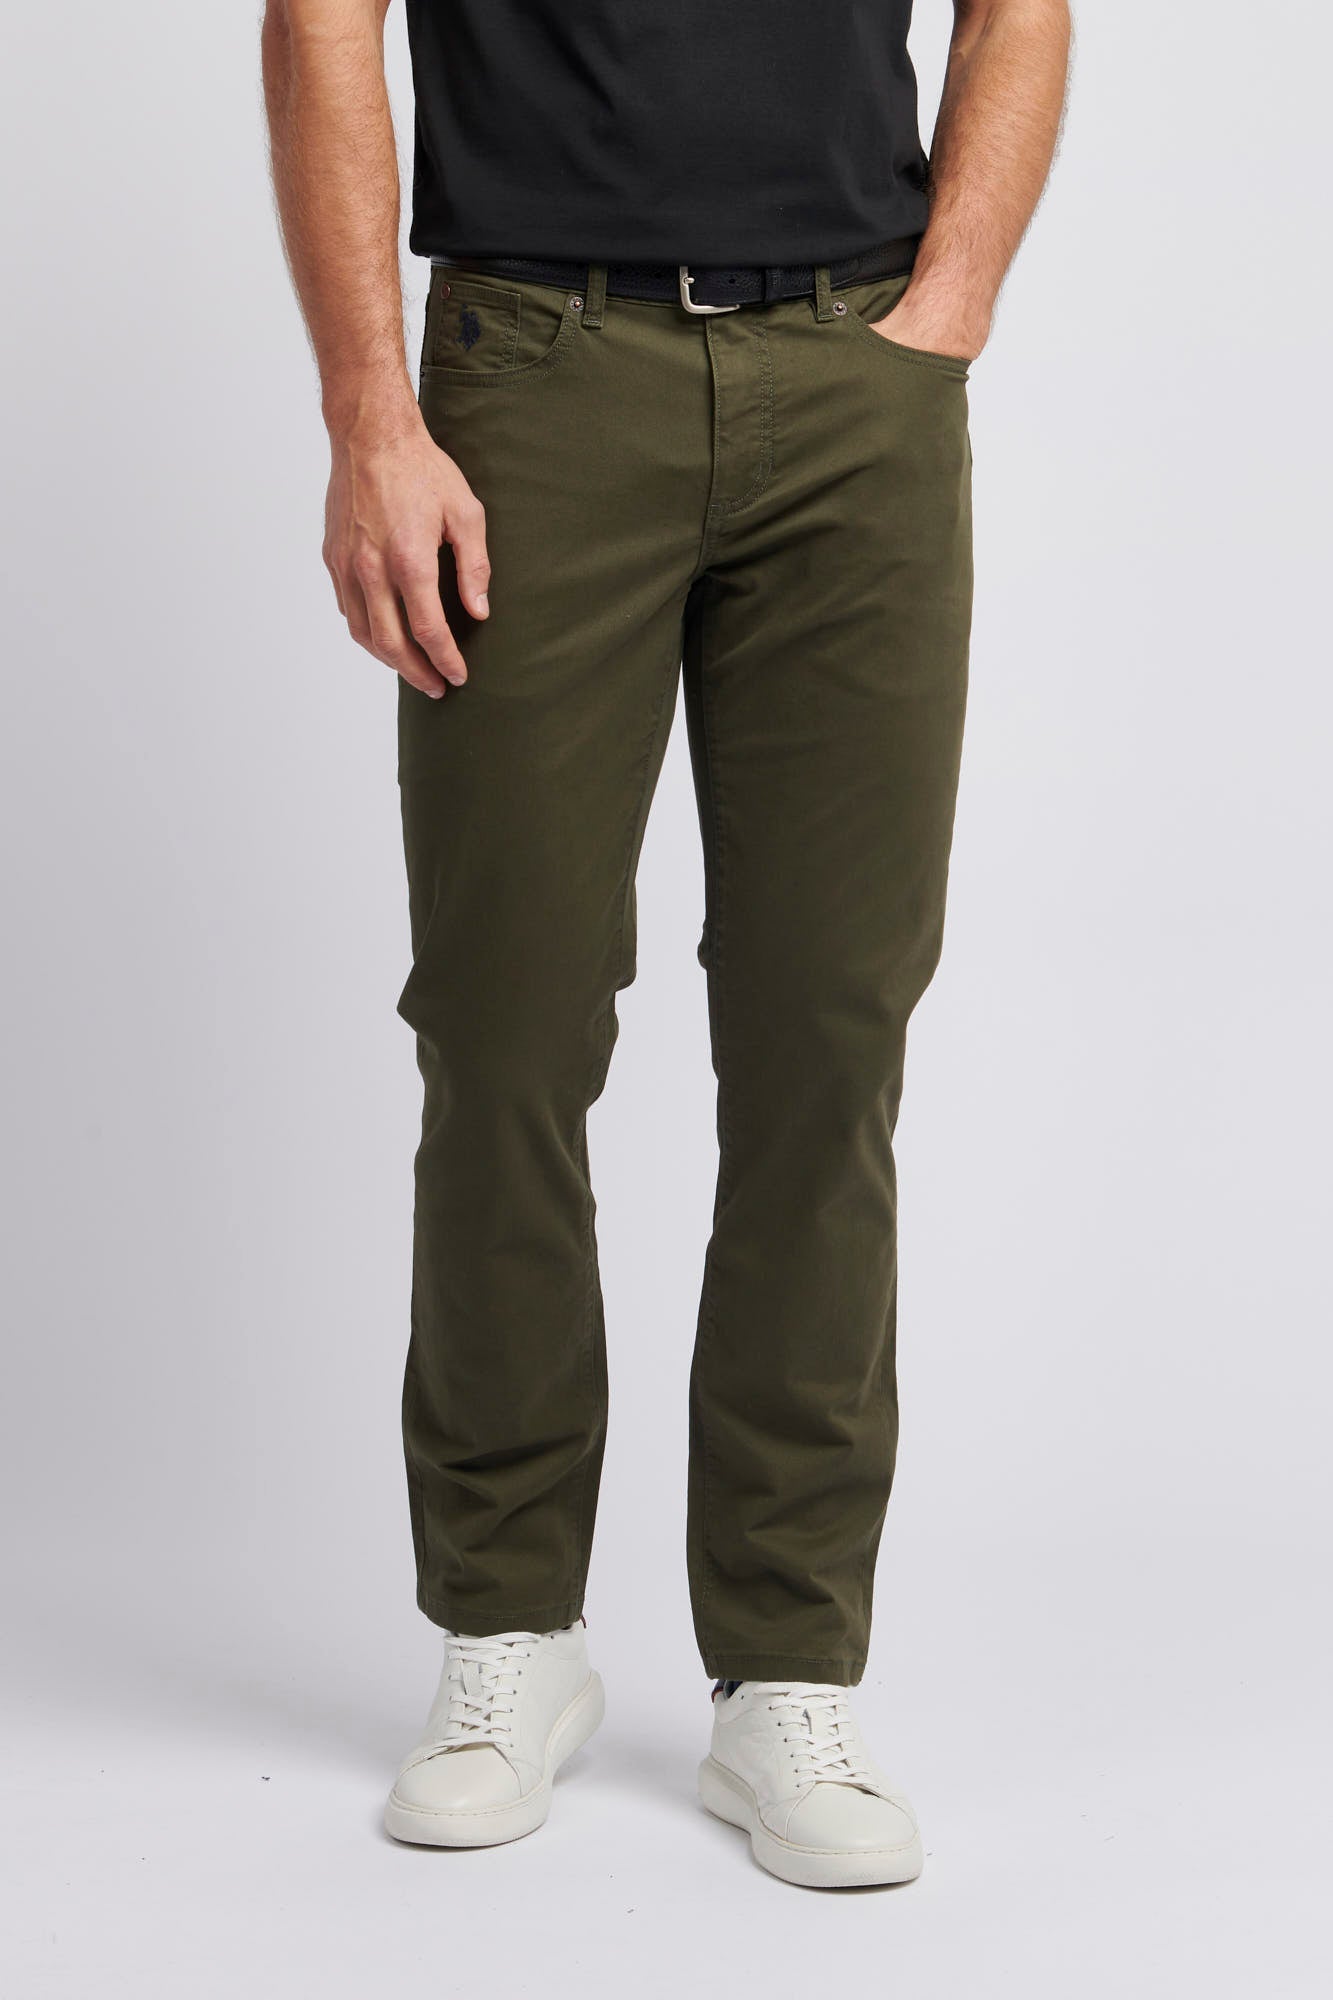 U.S. Polo Assn. Mens 5 Pocket Trouser in Forest Night